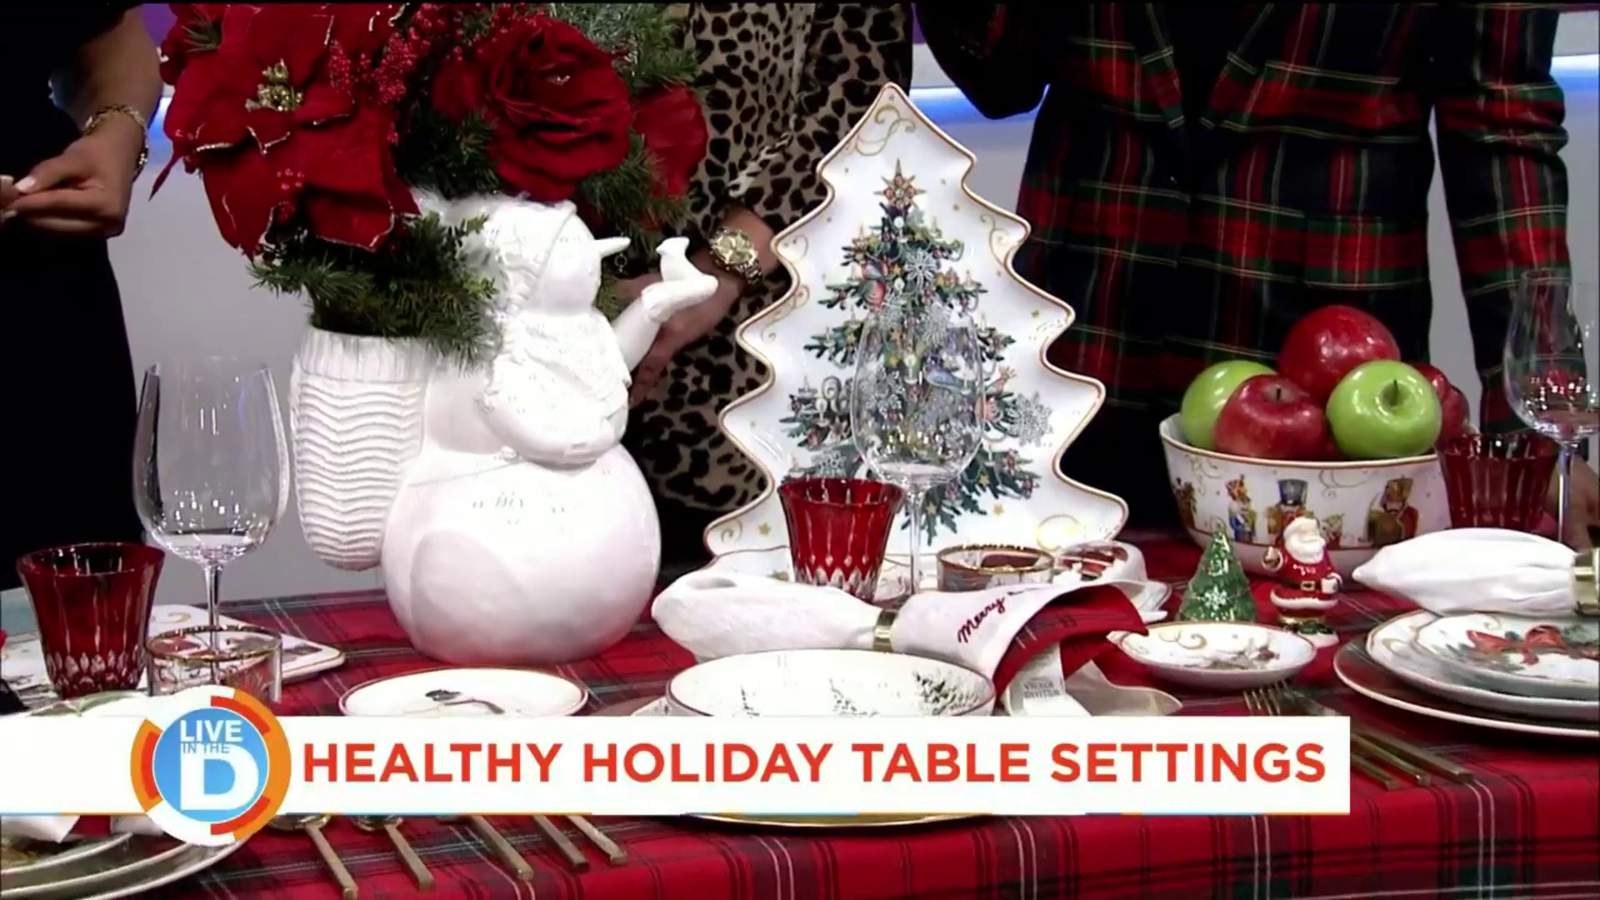 WW helps you make your holiday table bright and beautiful